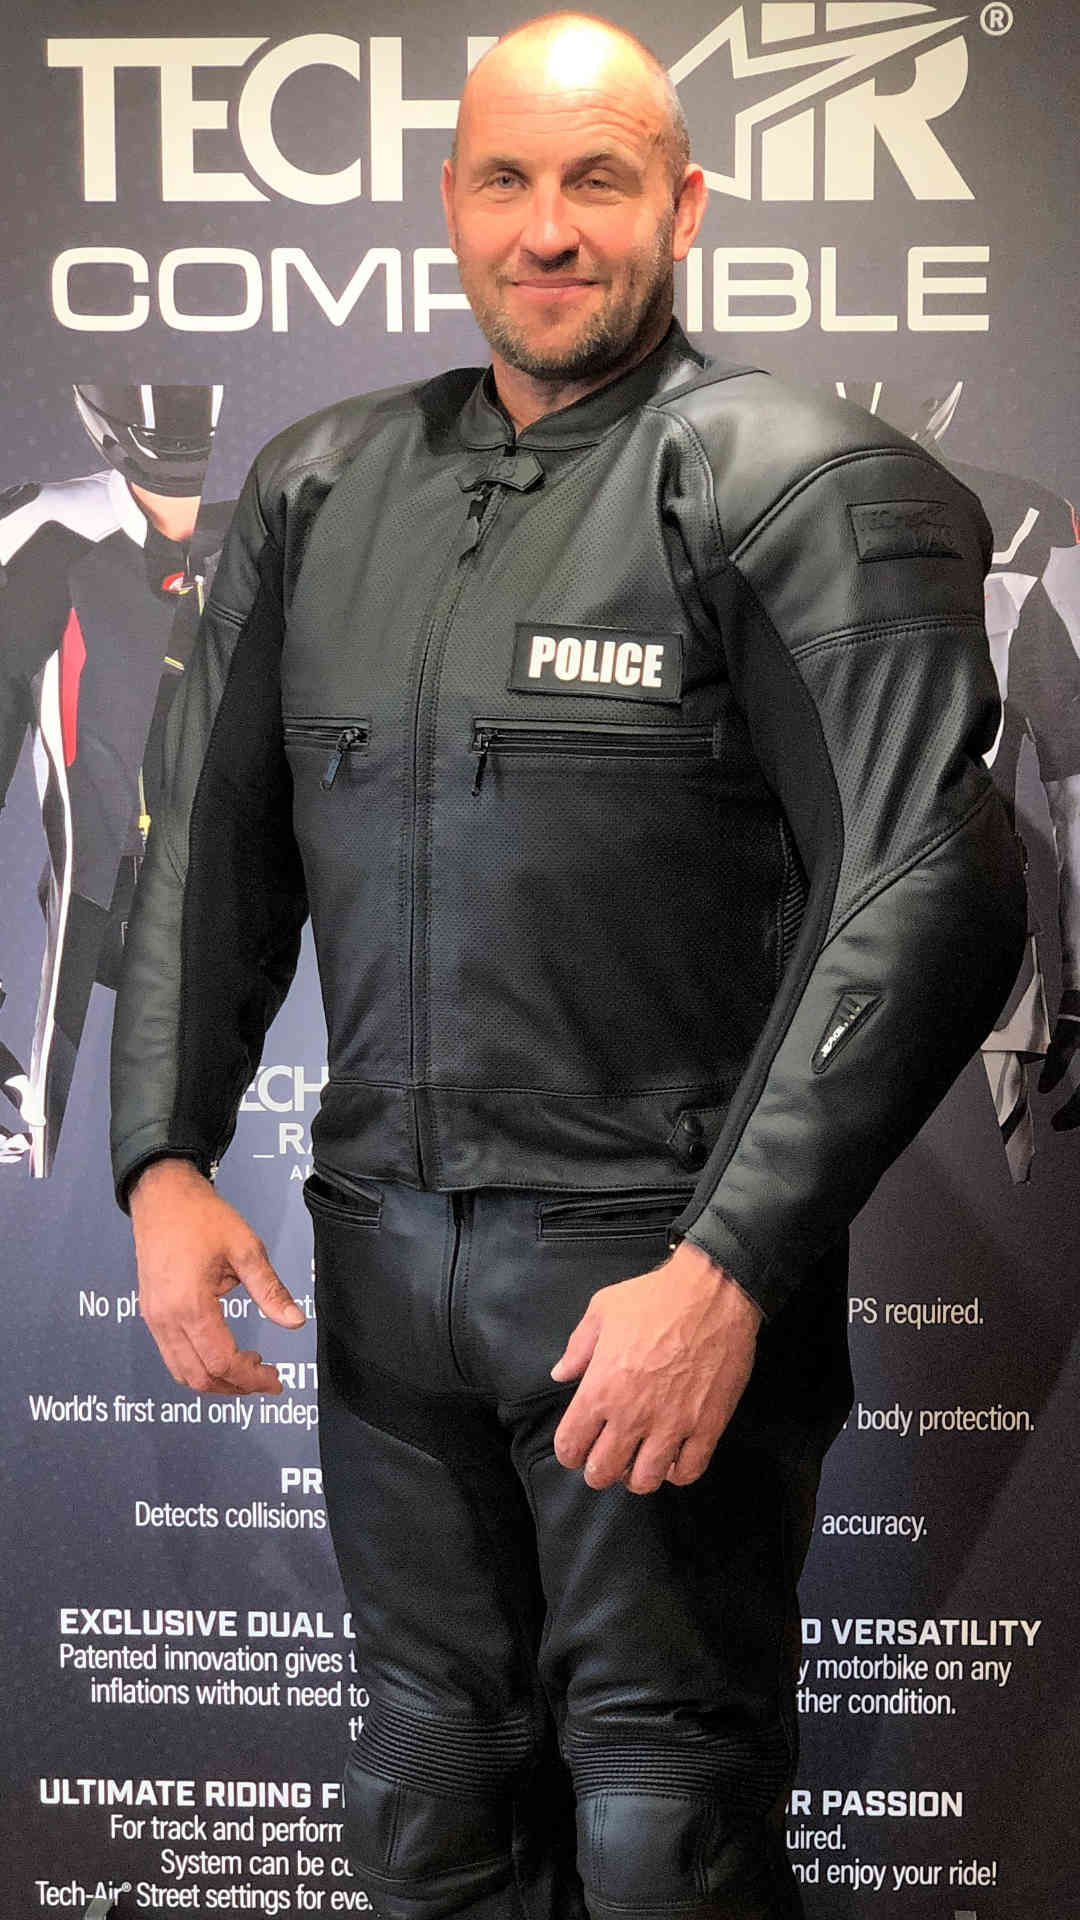 Police motorcyclists wear motorcycle clothing of the highest standards